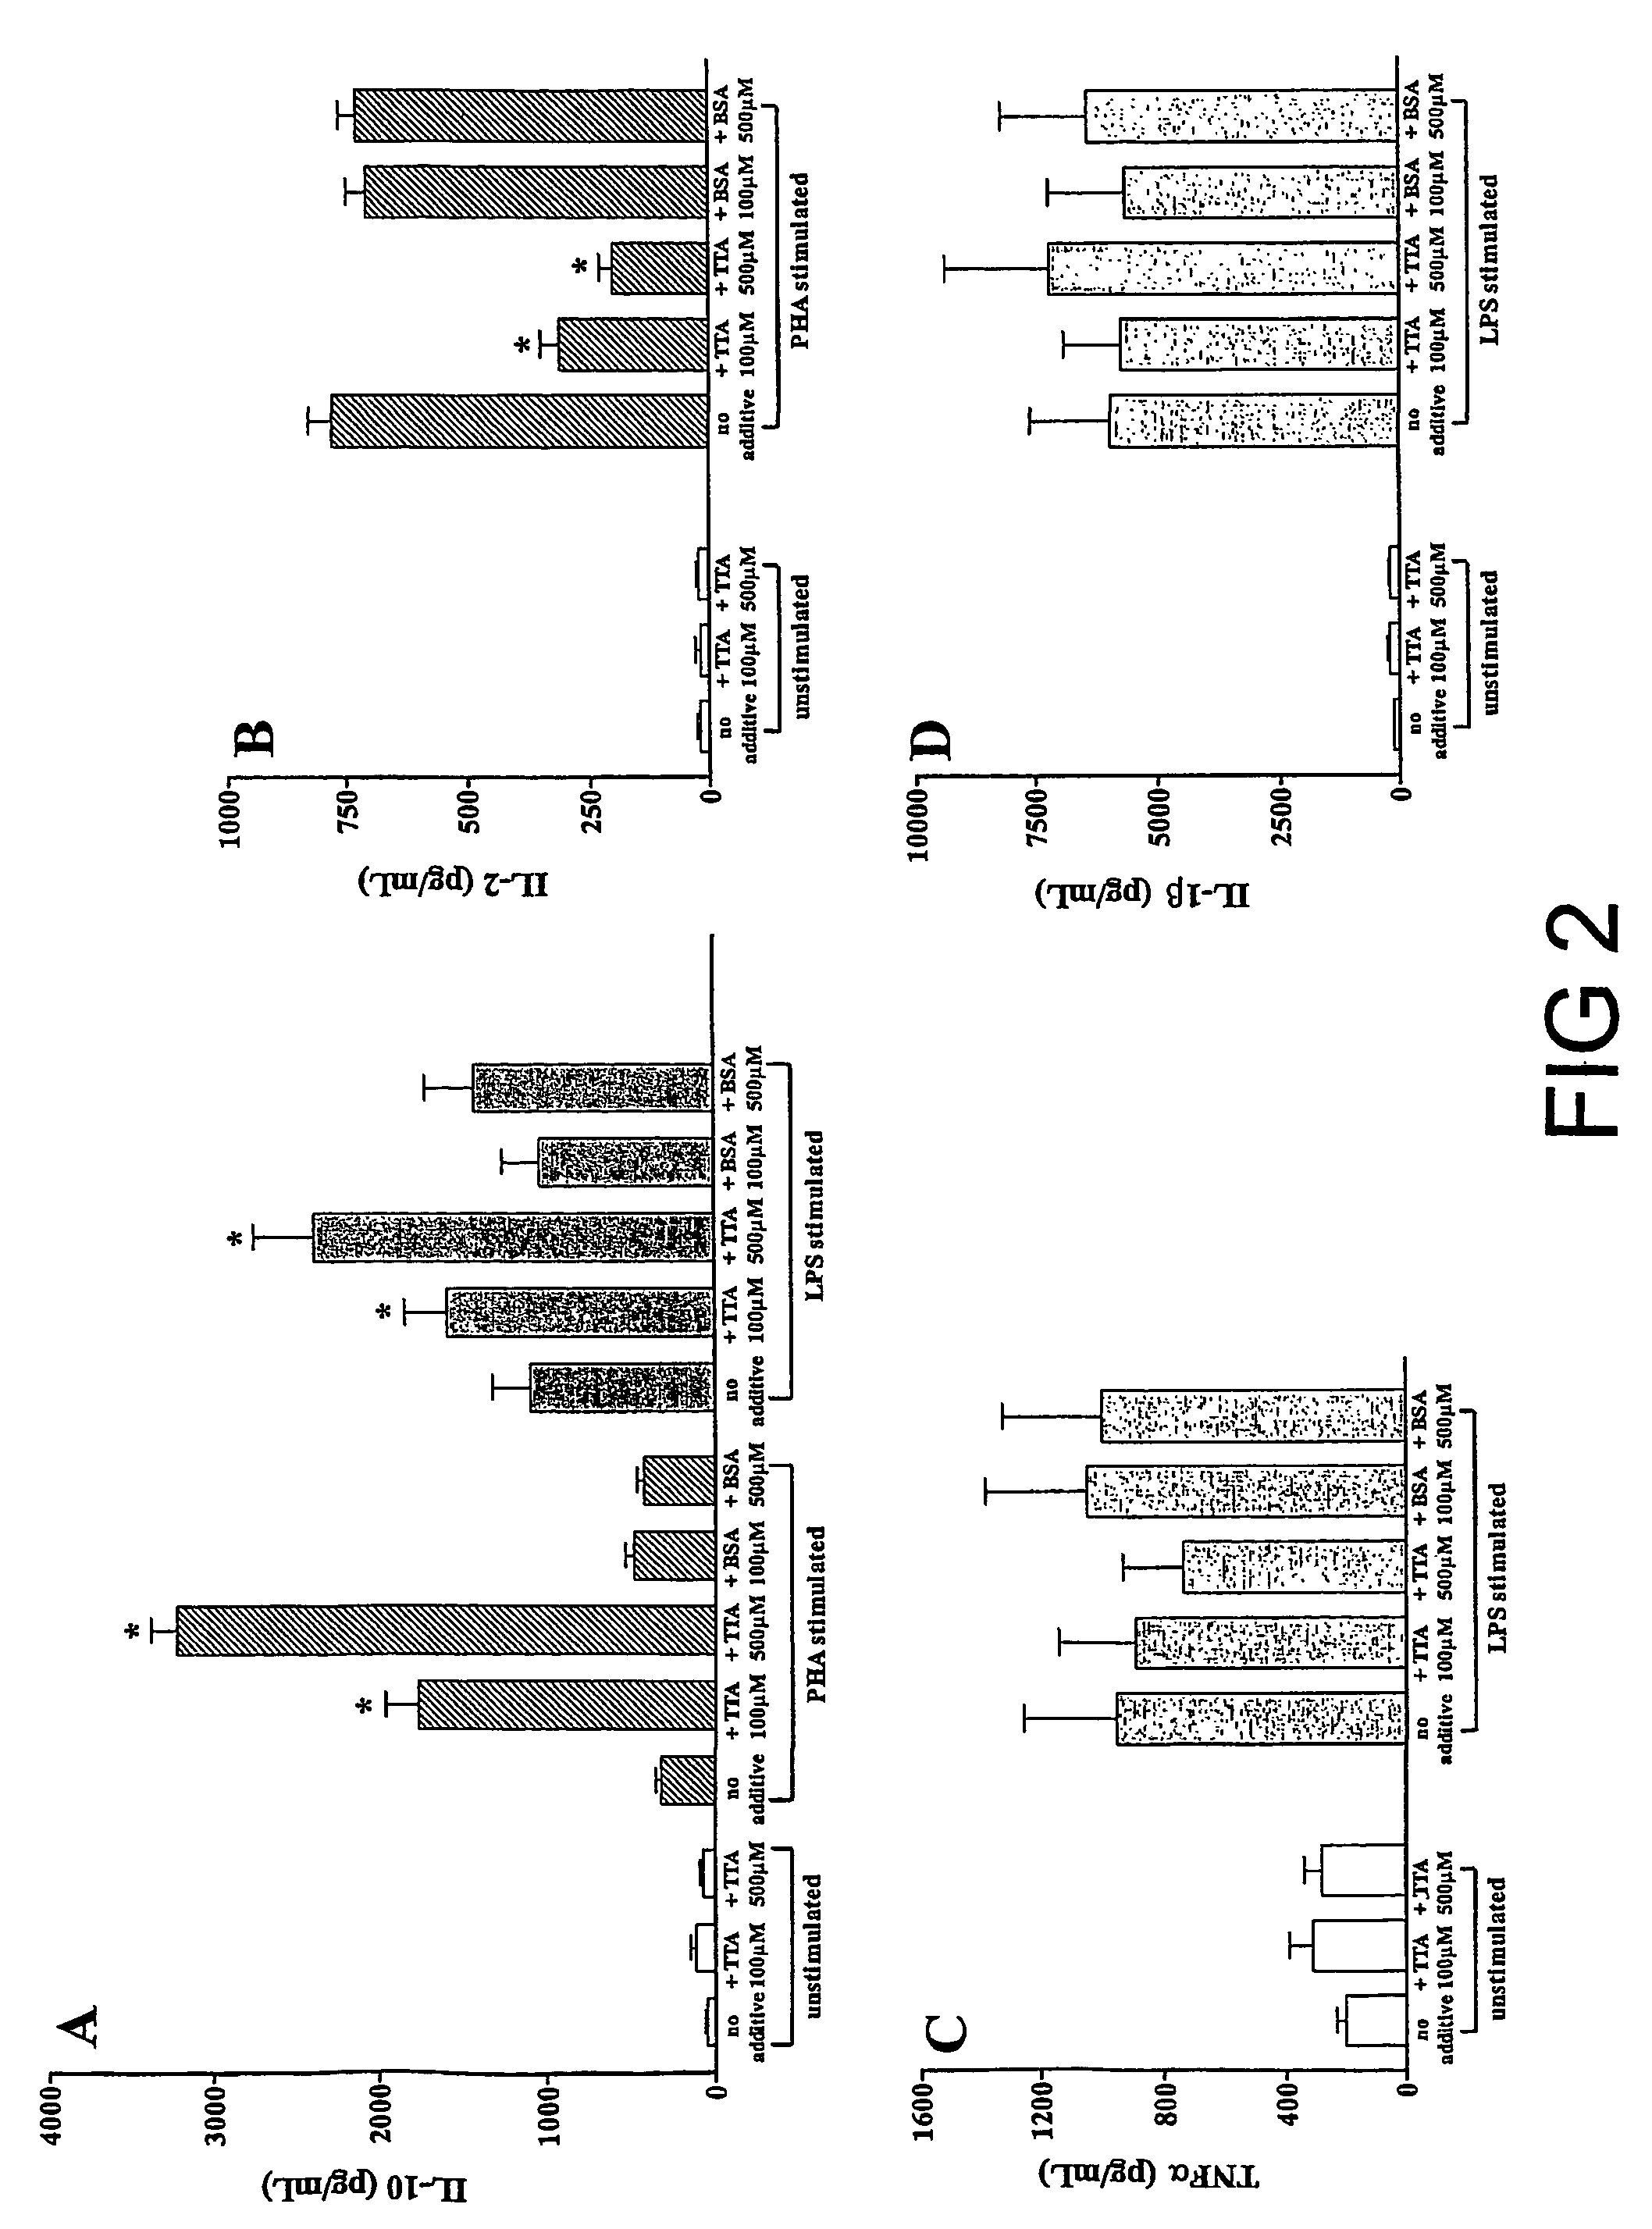 Fatty acid analogues for the treatment of inflammatory and autoimmune disorders